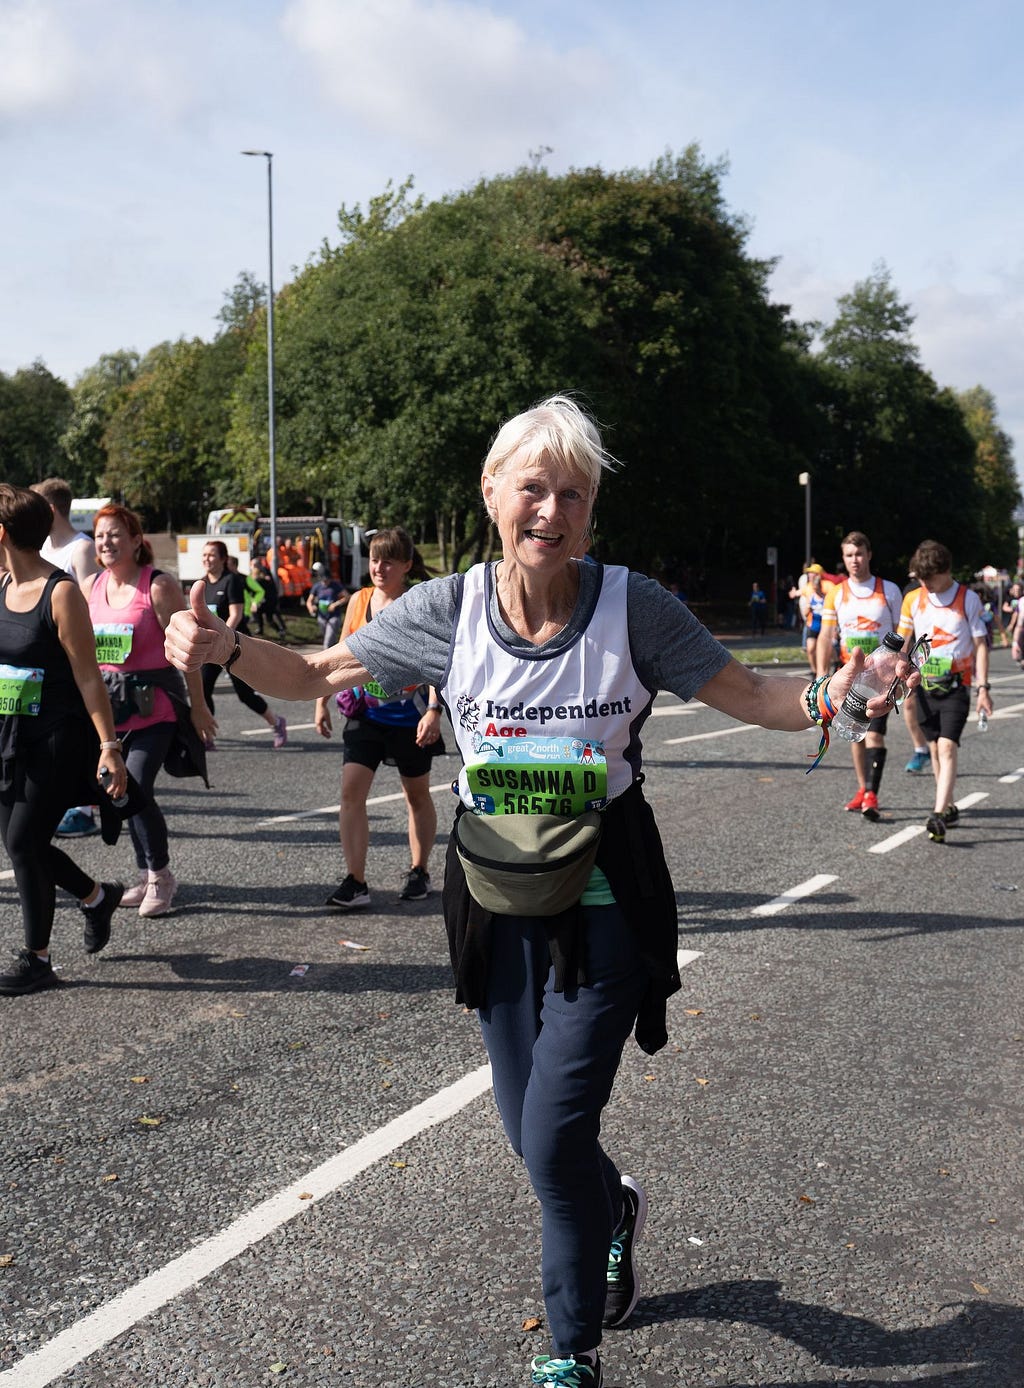 Susanna, an older woman, smiles at the camera as she runs. She wears an Independent Age running vest and holds her hands in two thumbs up.